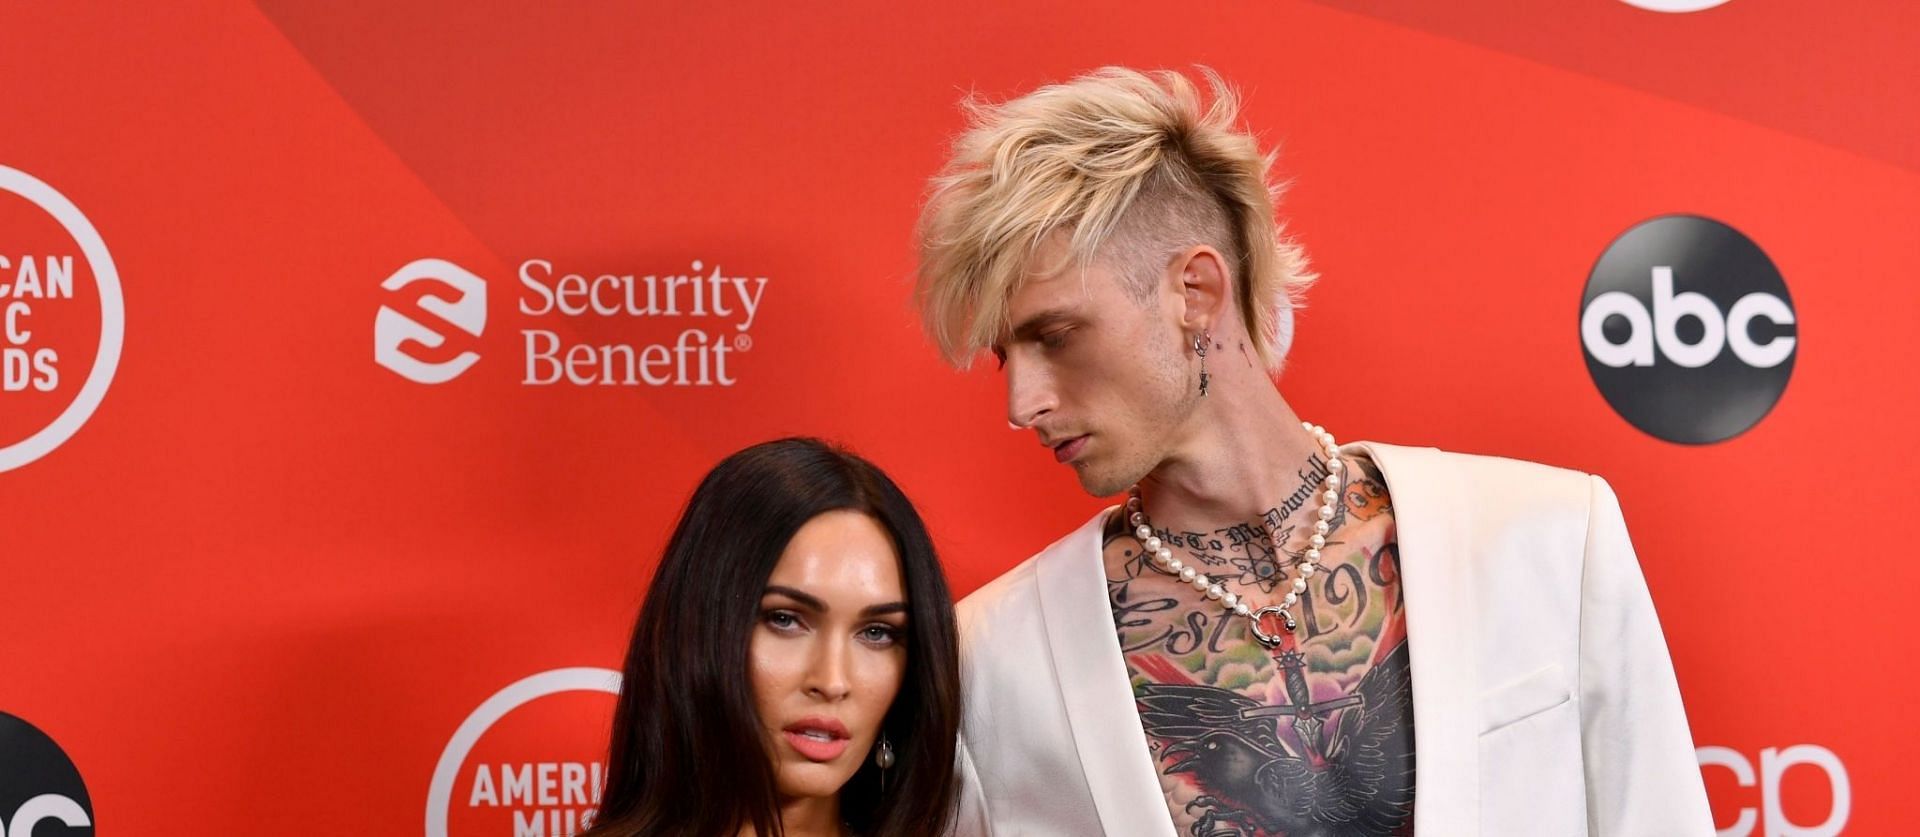 Machine Gun Kelly and Megan Fox started dating in 2020 (Image via Getty Images)